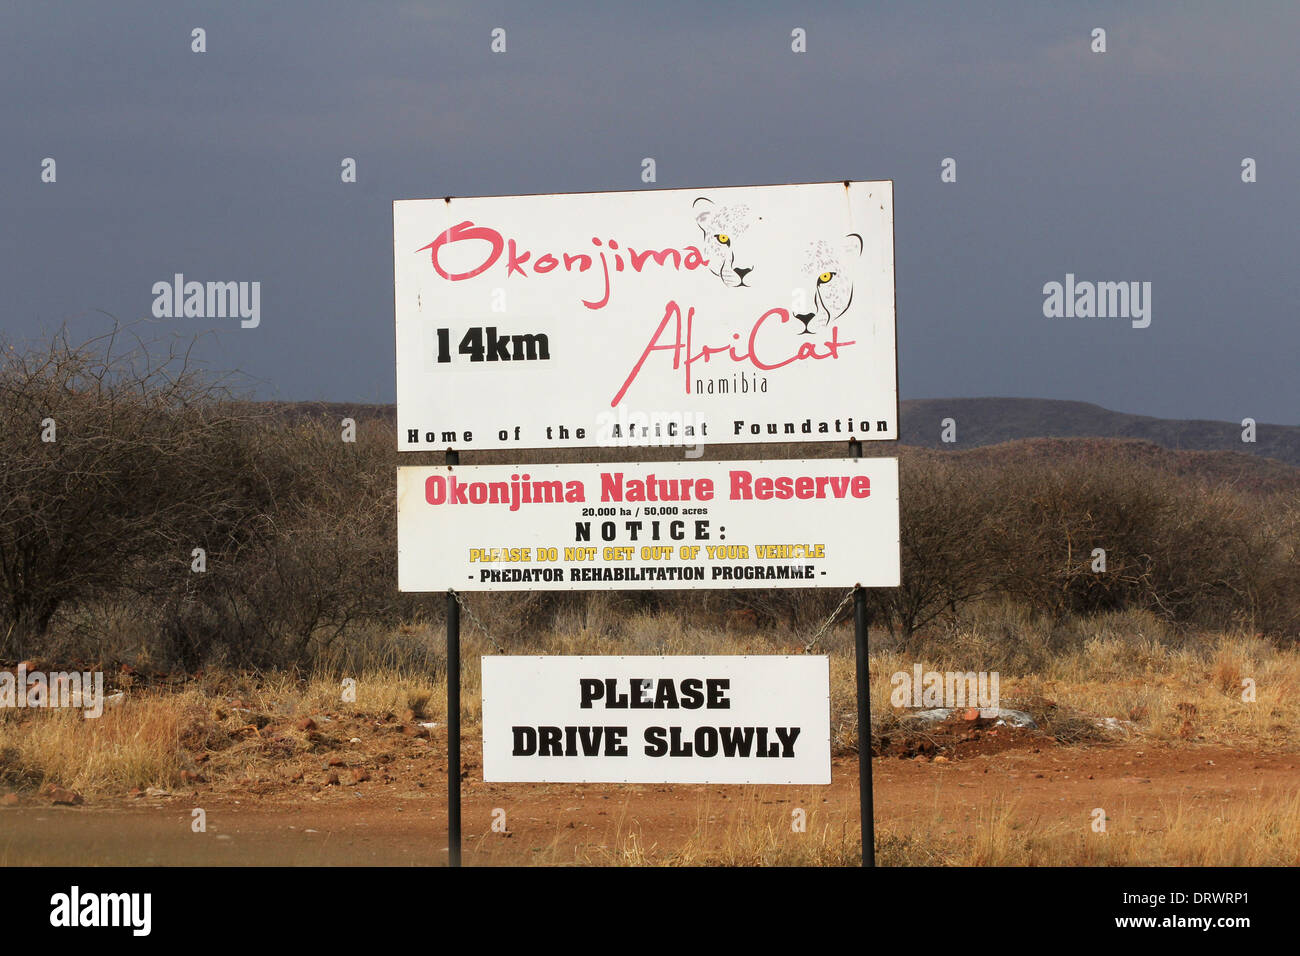 Okonjima AfriCat Foundation sign at the side of the road leading into the Nature Reserve for leopards and cheetahs,Namibia. Stock Photo